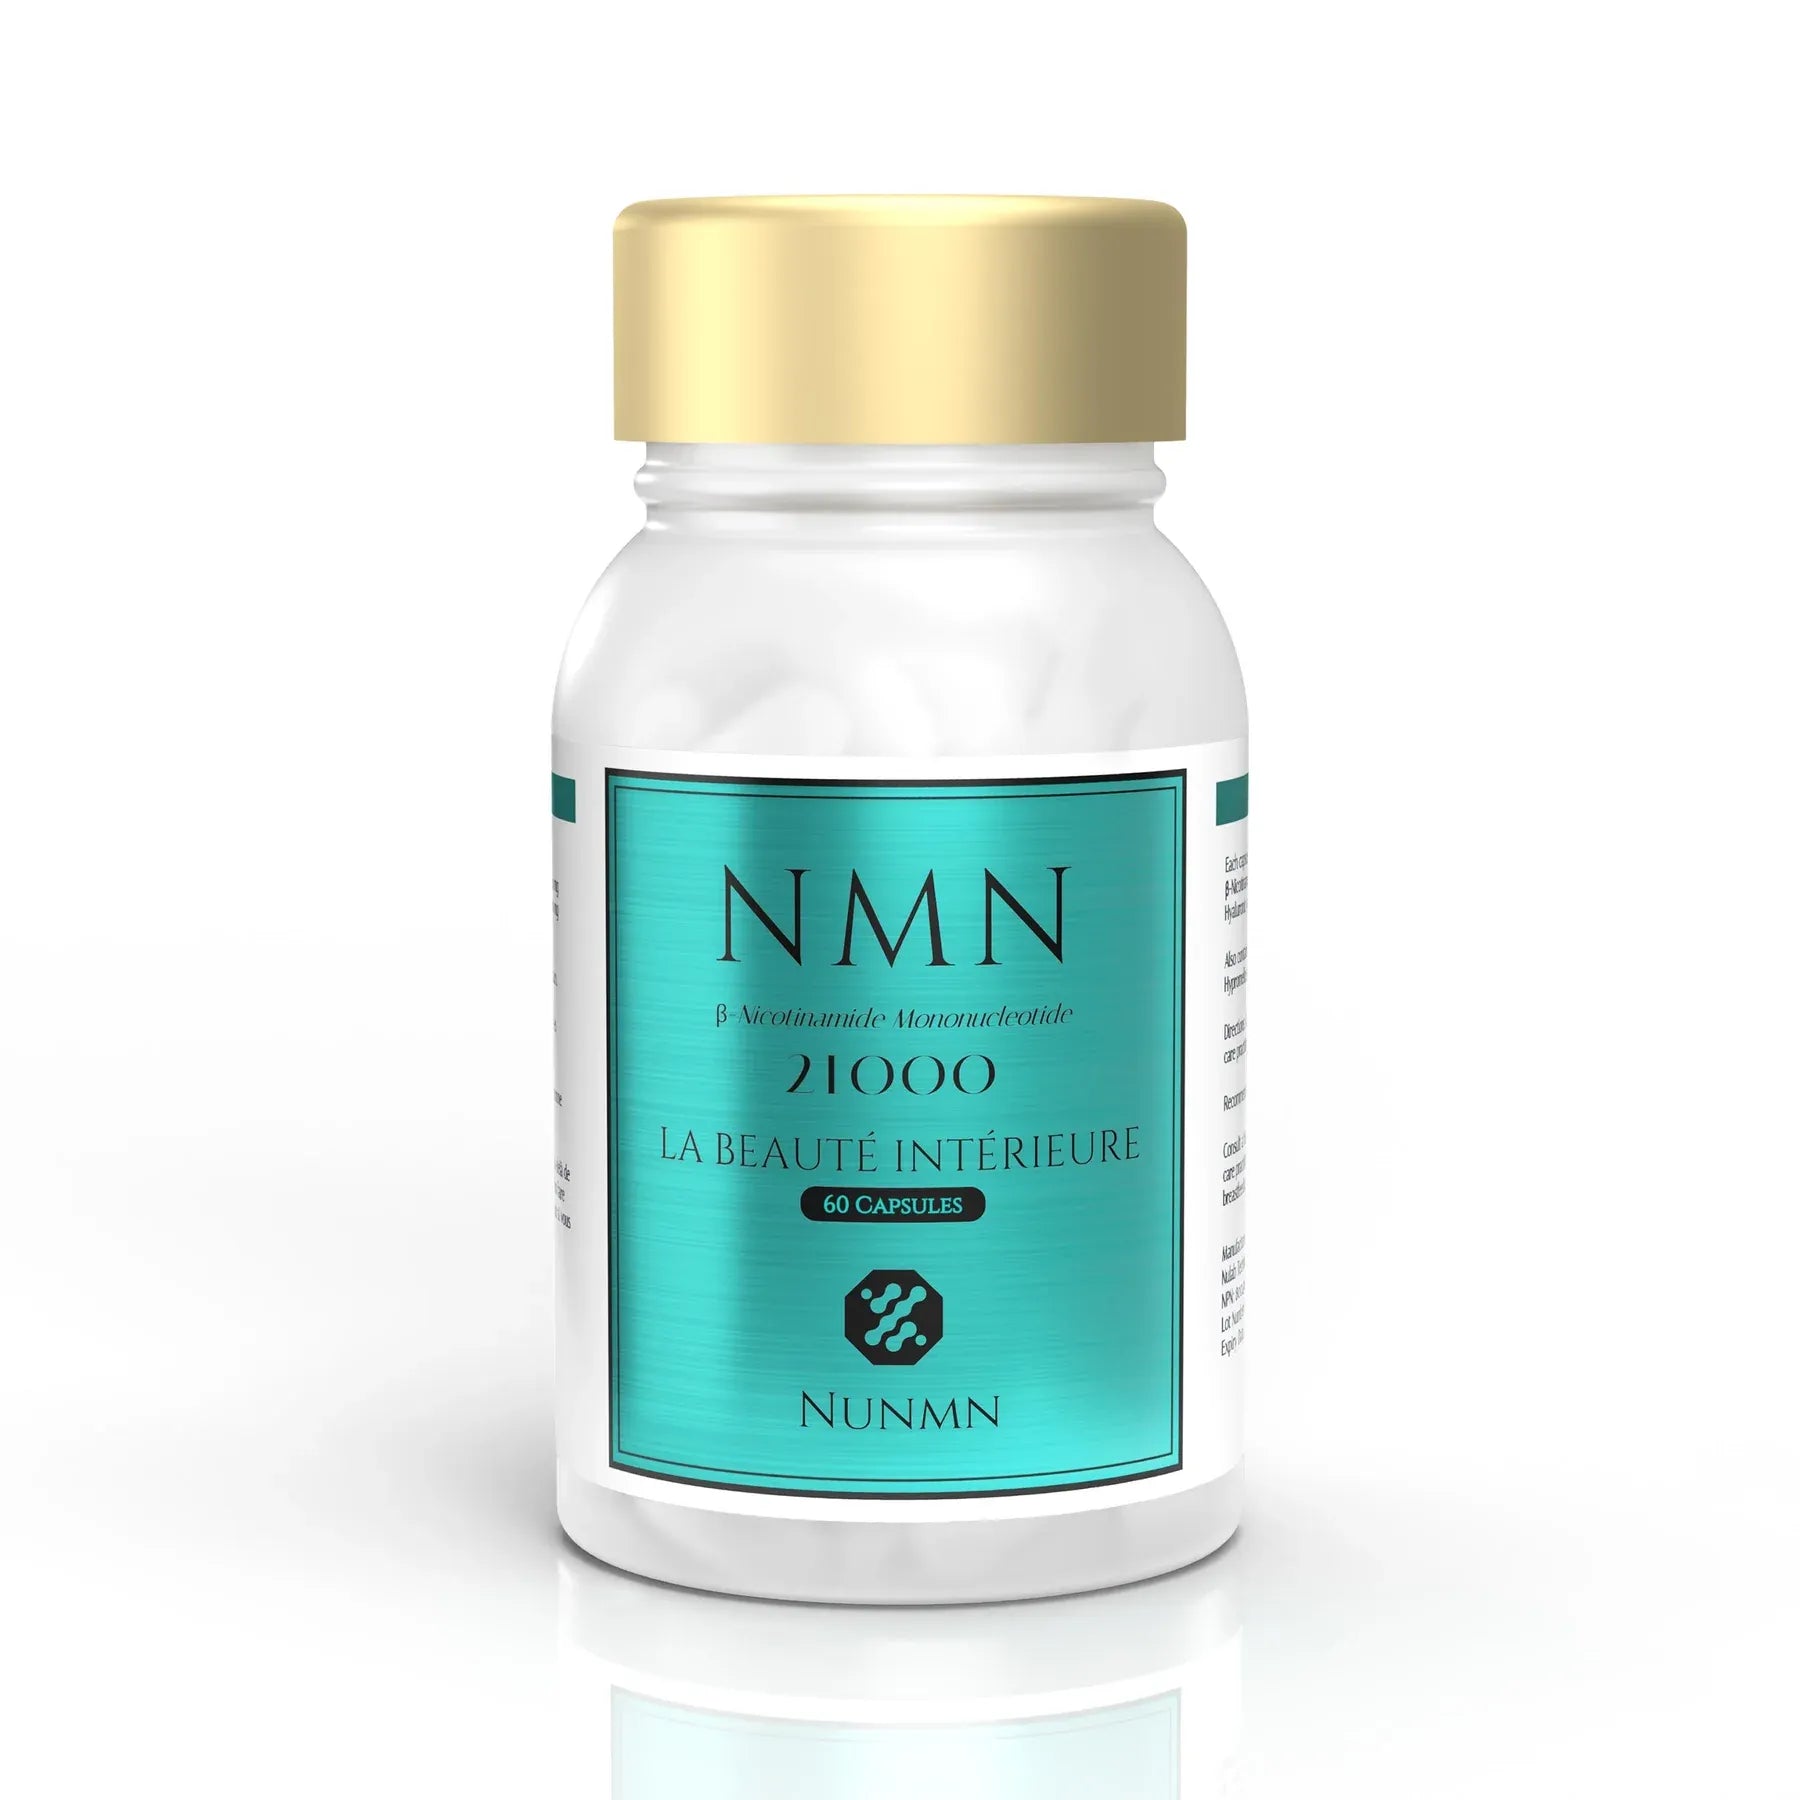 NMN supplement containing 21,000 units of NAD+